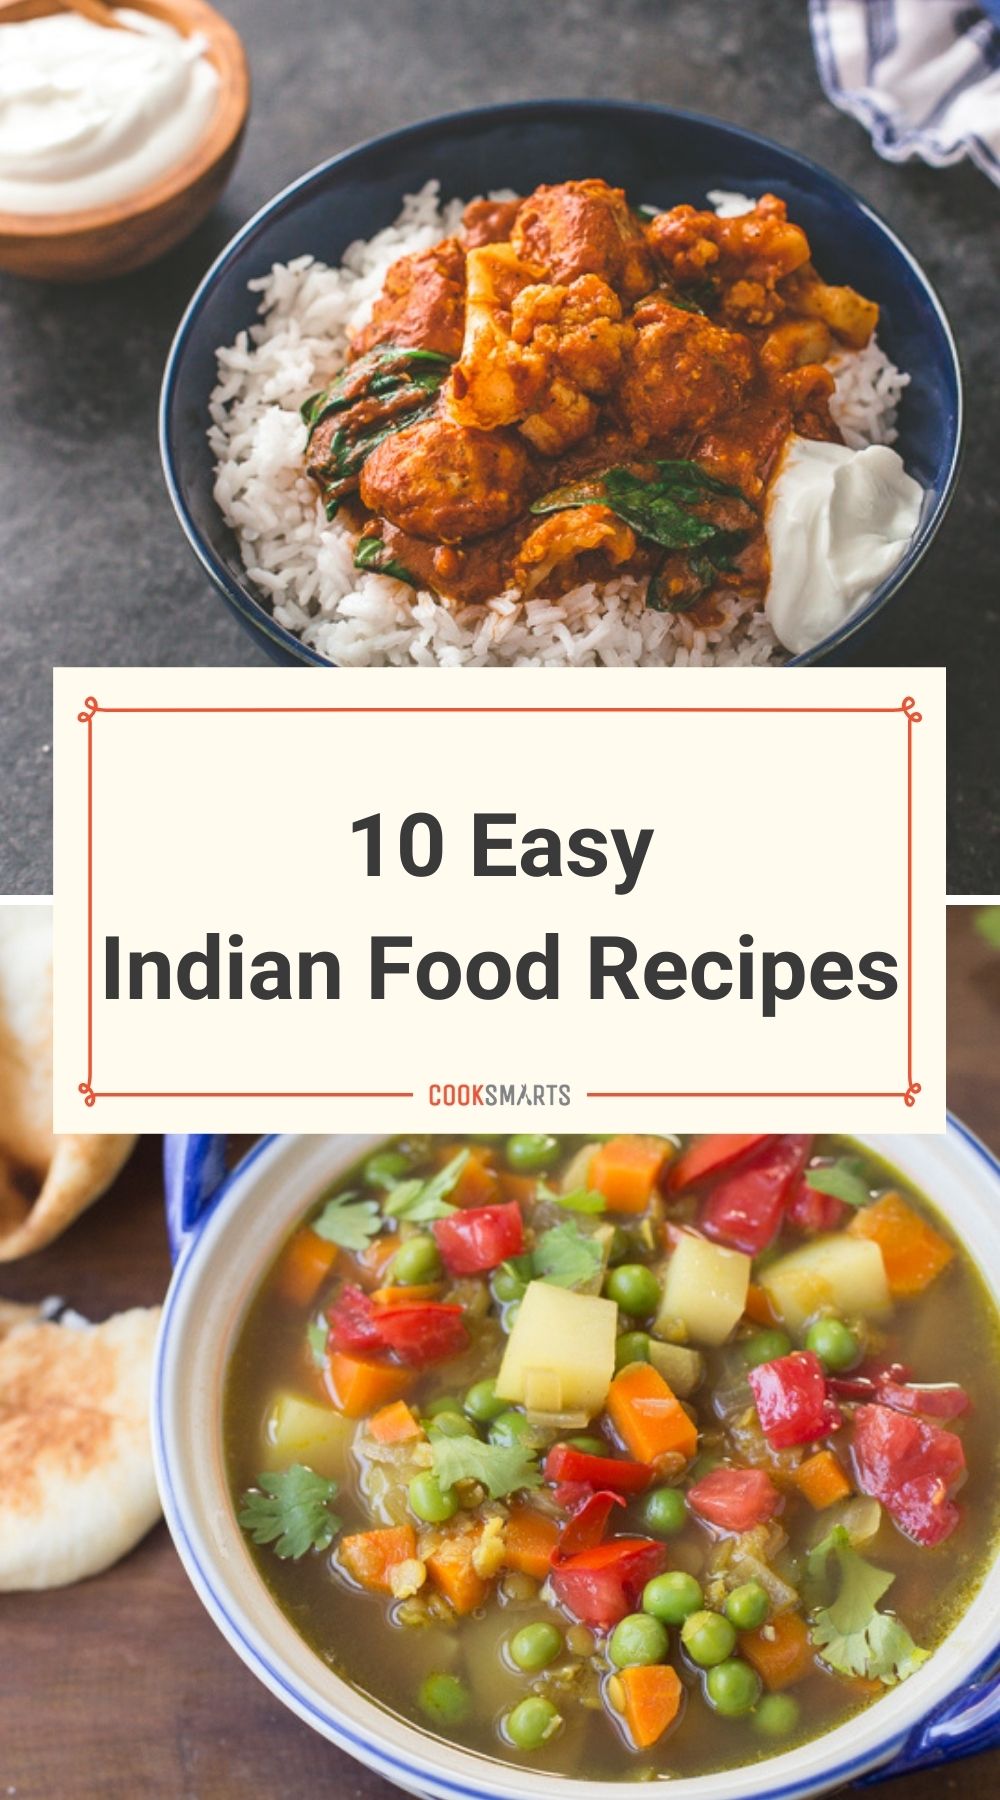 10 Easy Indian Food Recipes for Beginners